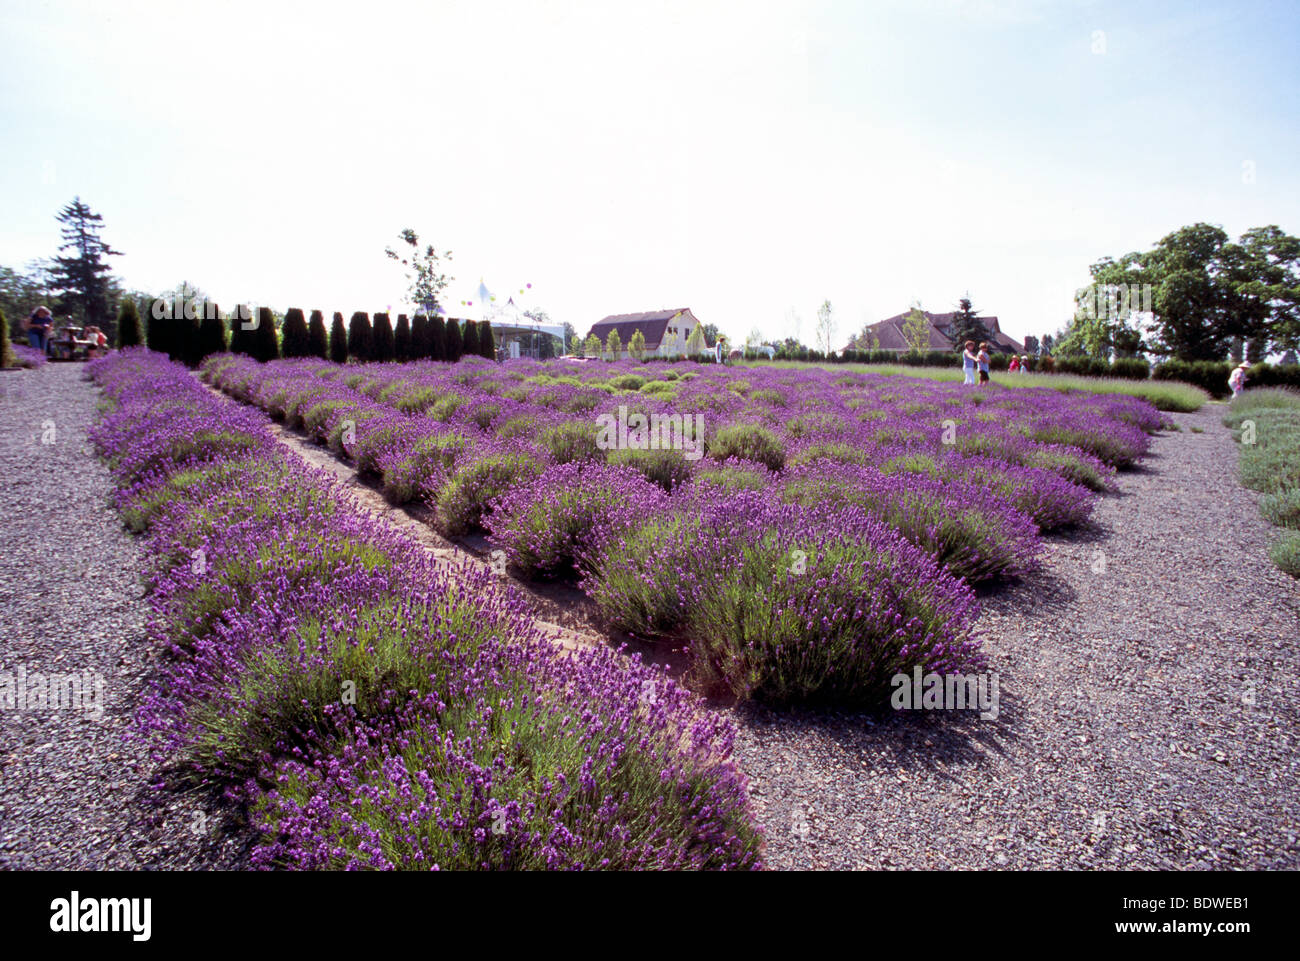 Lavender Fields (Lavandula angustifolia) - Flower, Plant, Crop and Harvest on Farm - Fraser Valley, BC, British Columbia, Canada Stock Photo